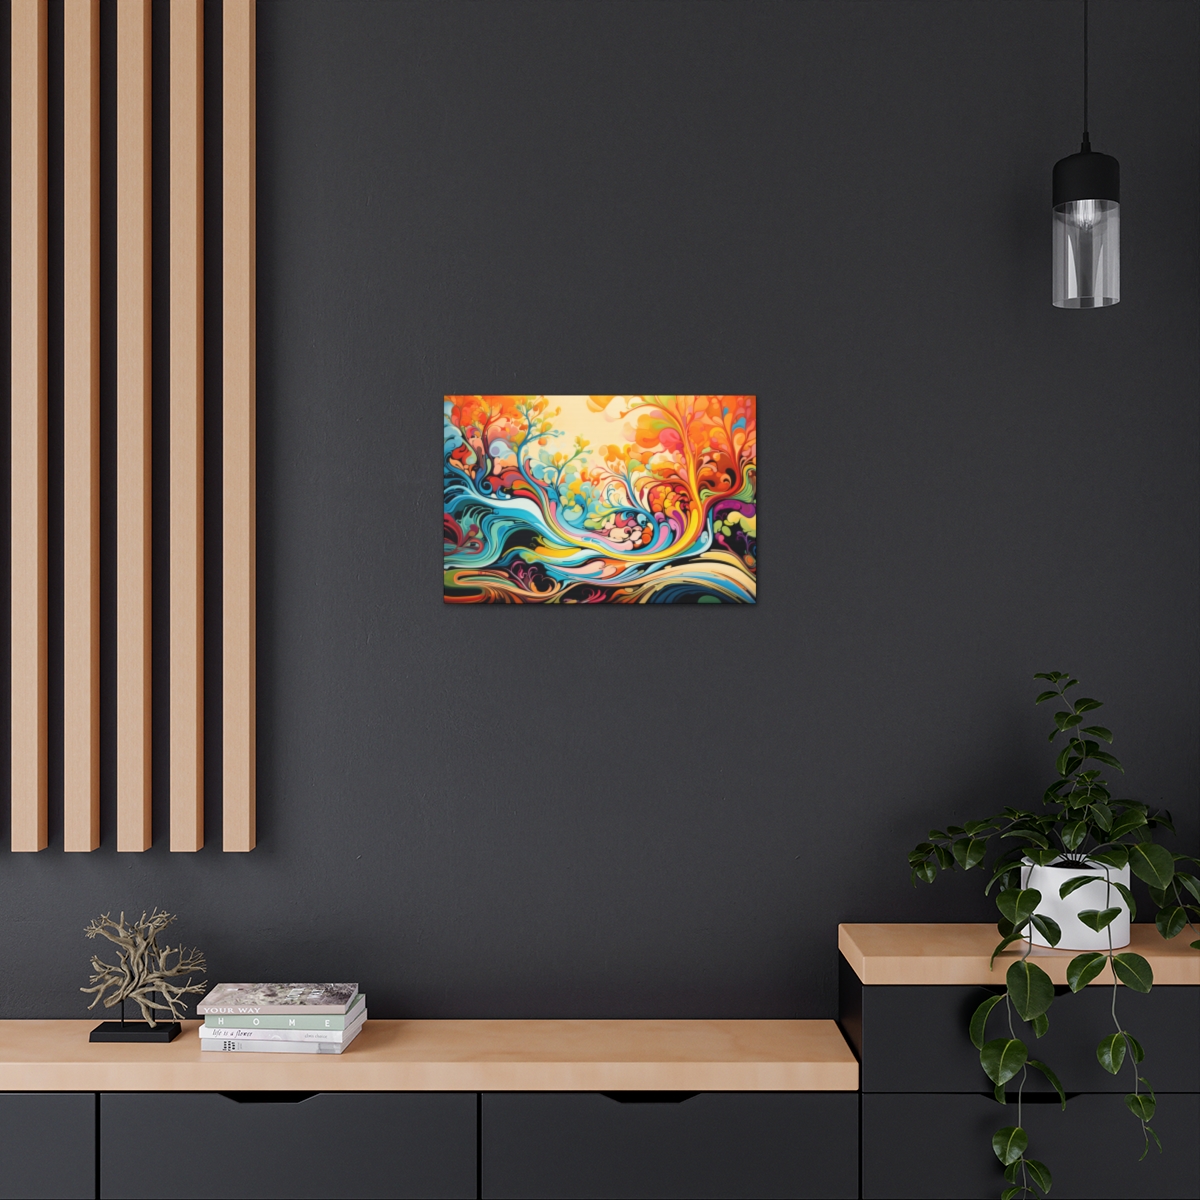 Abstract Hippie Trippy Flower Art Canvas Print: Dreamy Explorations